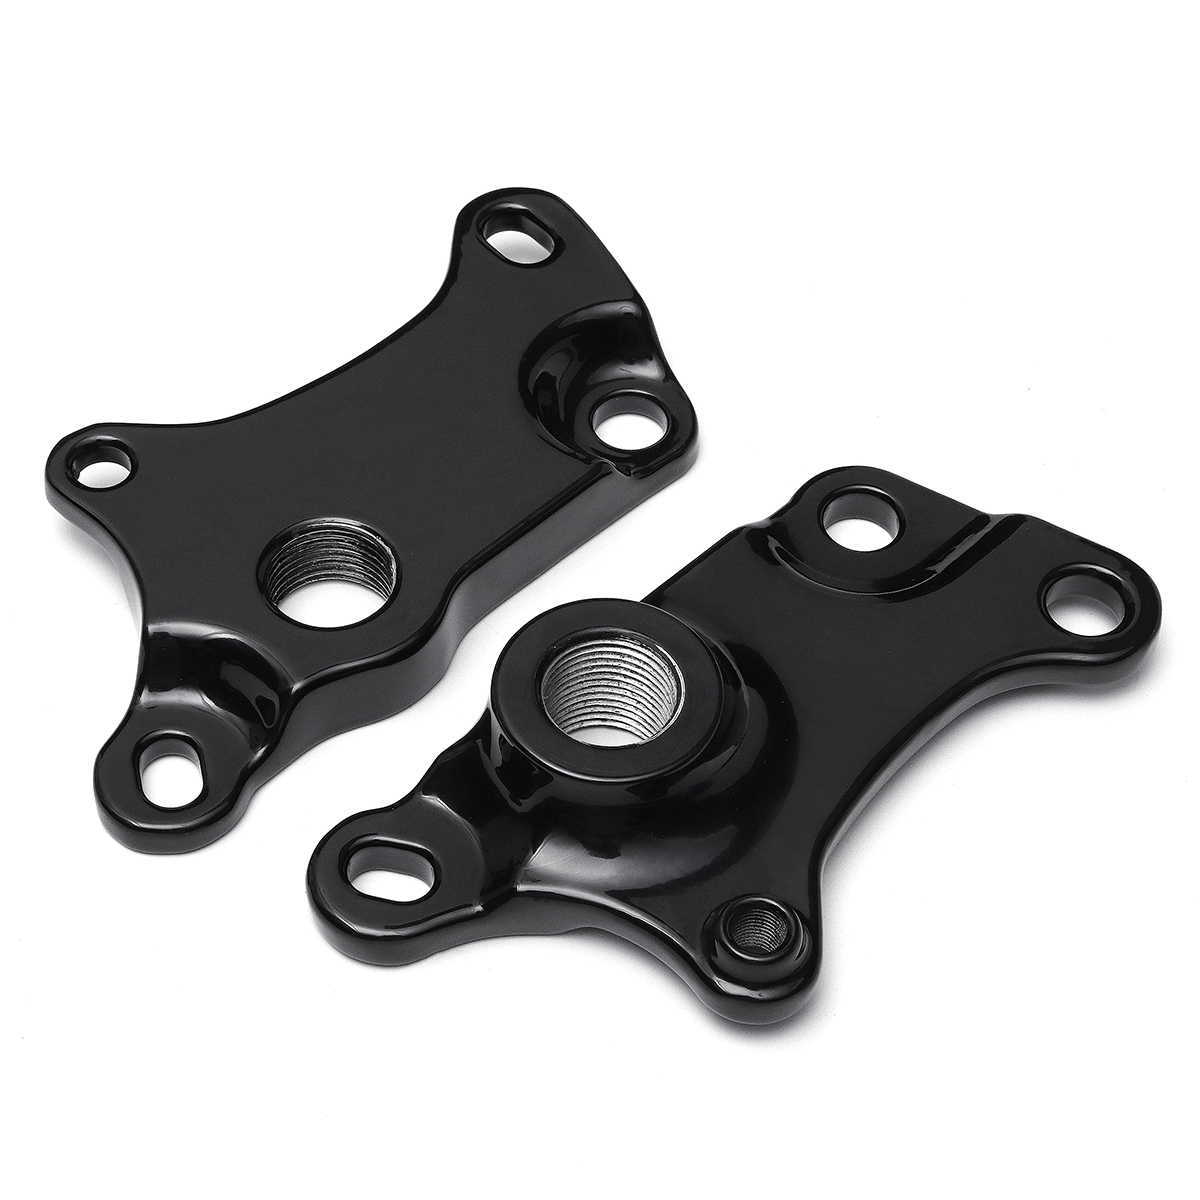 Black-Foot-Pegs-Forward-Controls-Complete-Kit-For-Harley-Sportster-XL883-XL1200-1991-2003-1324510